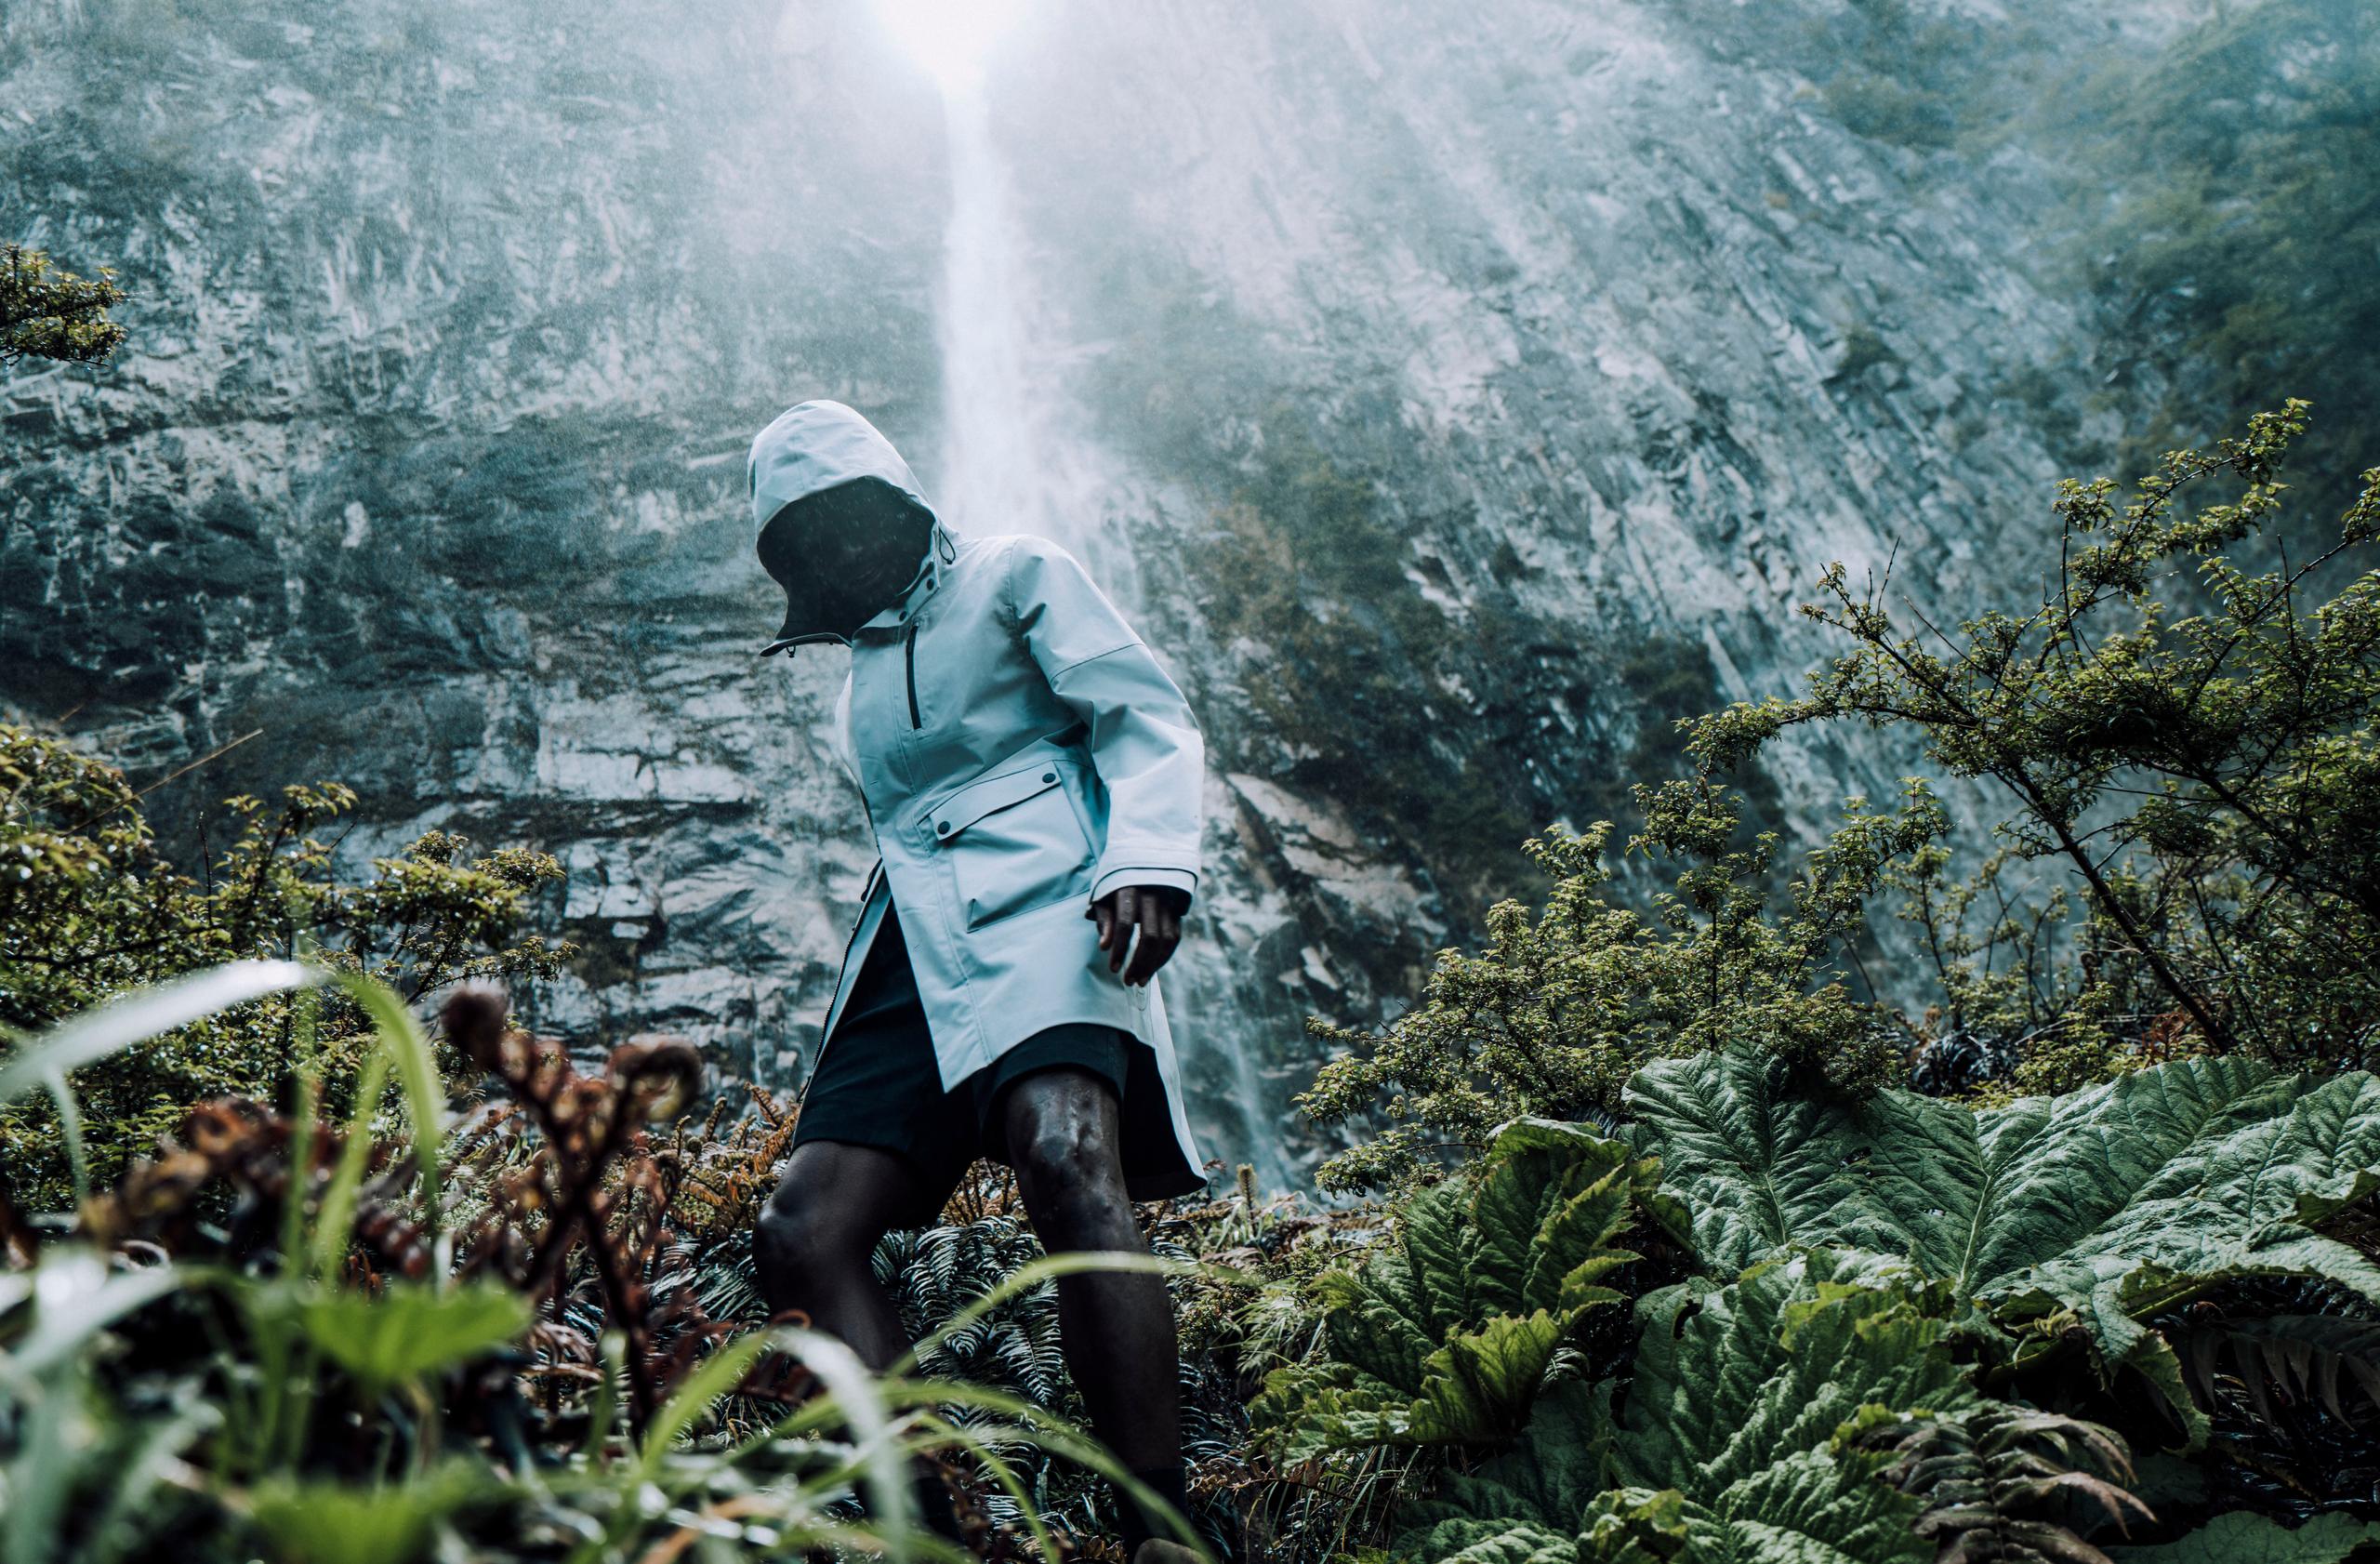 Man in Line Rain Poncho in rain from nearby waterfall in Patagonia